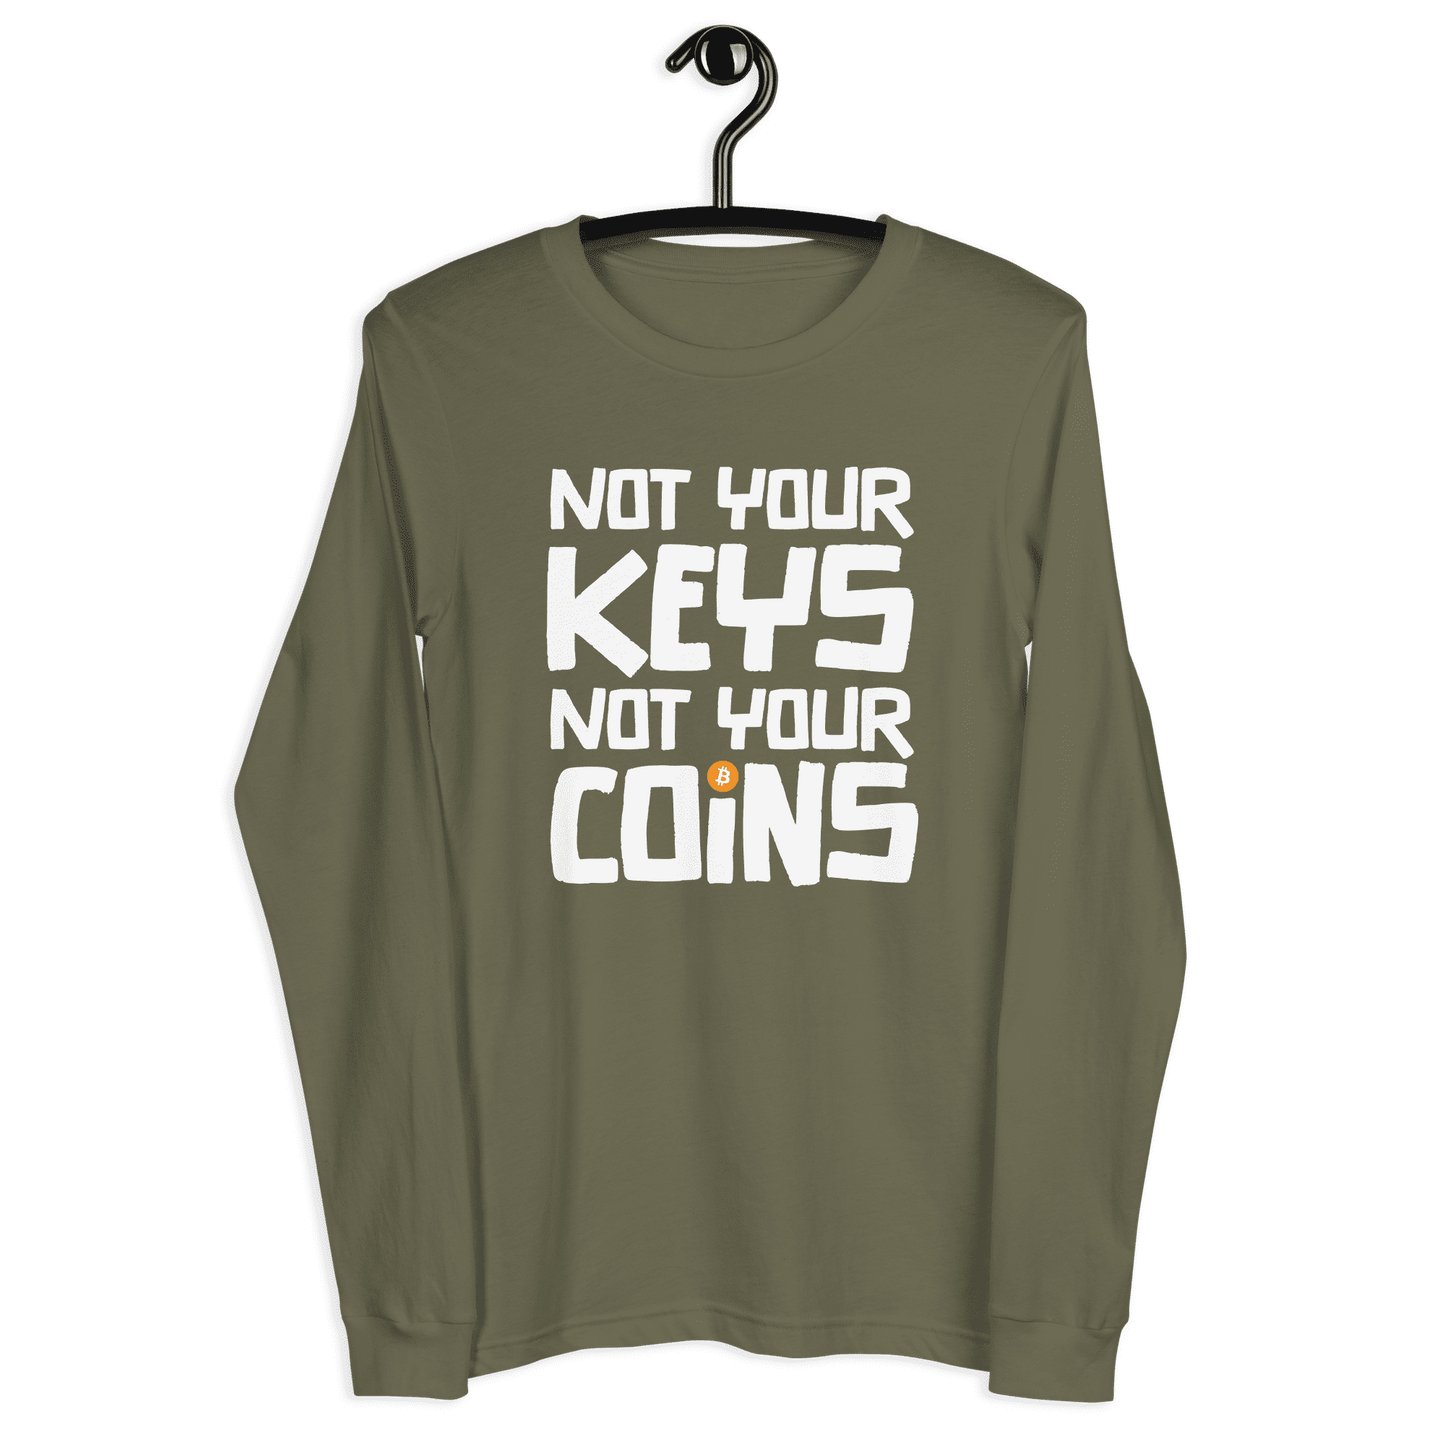 Not your Keys Not your Coins Unisex Langarm T-Shirt